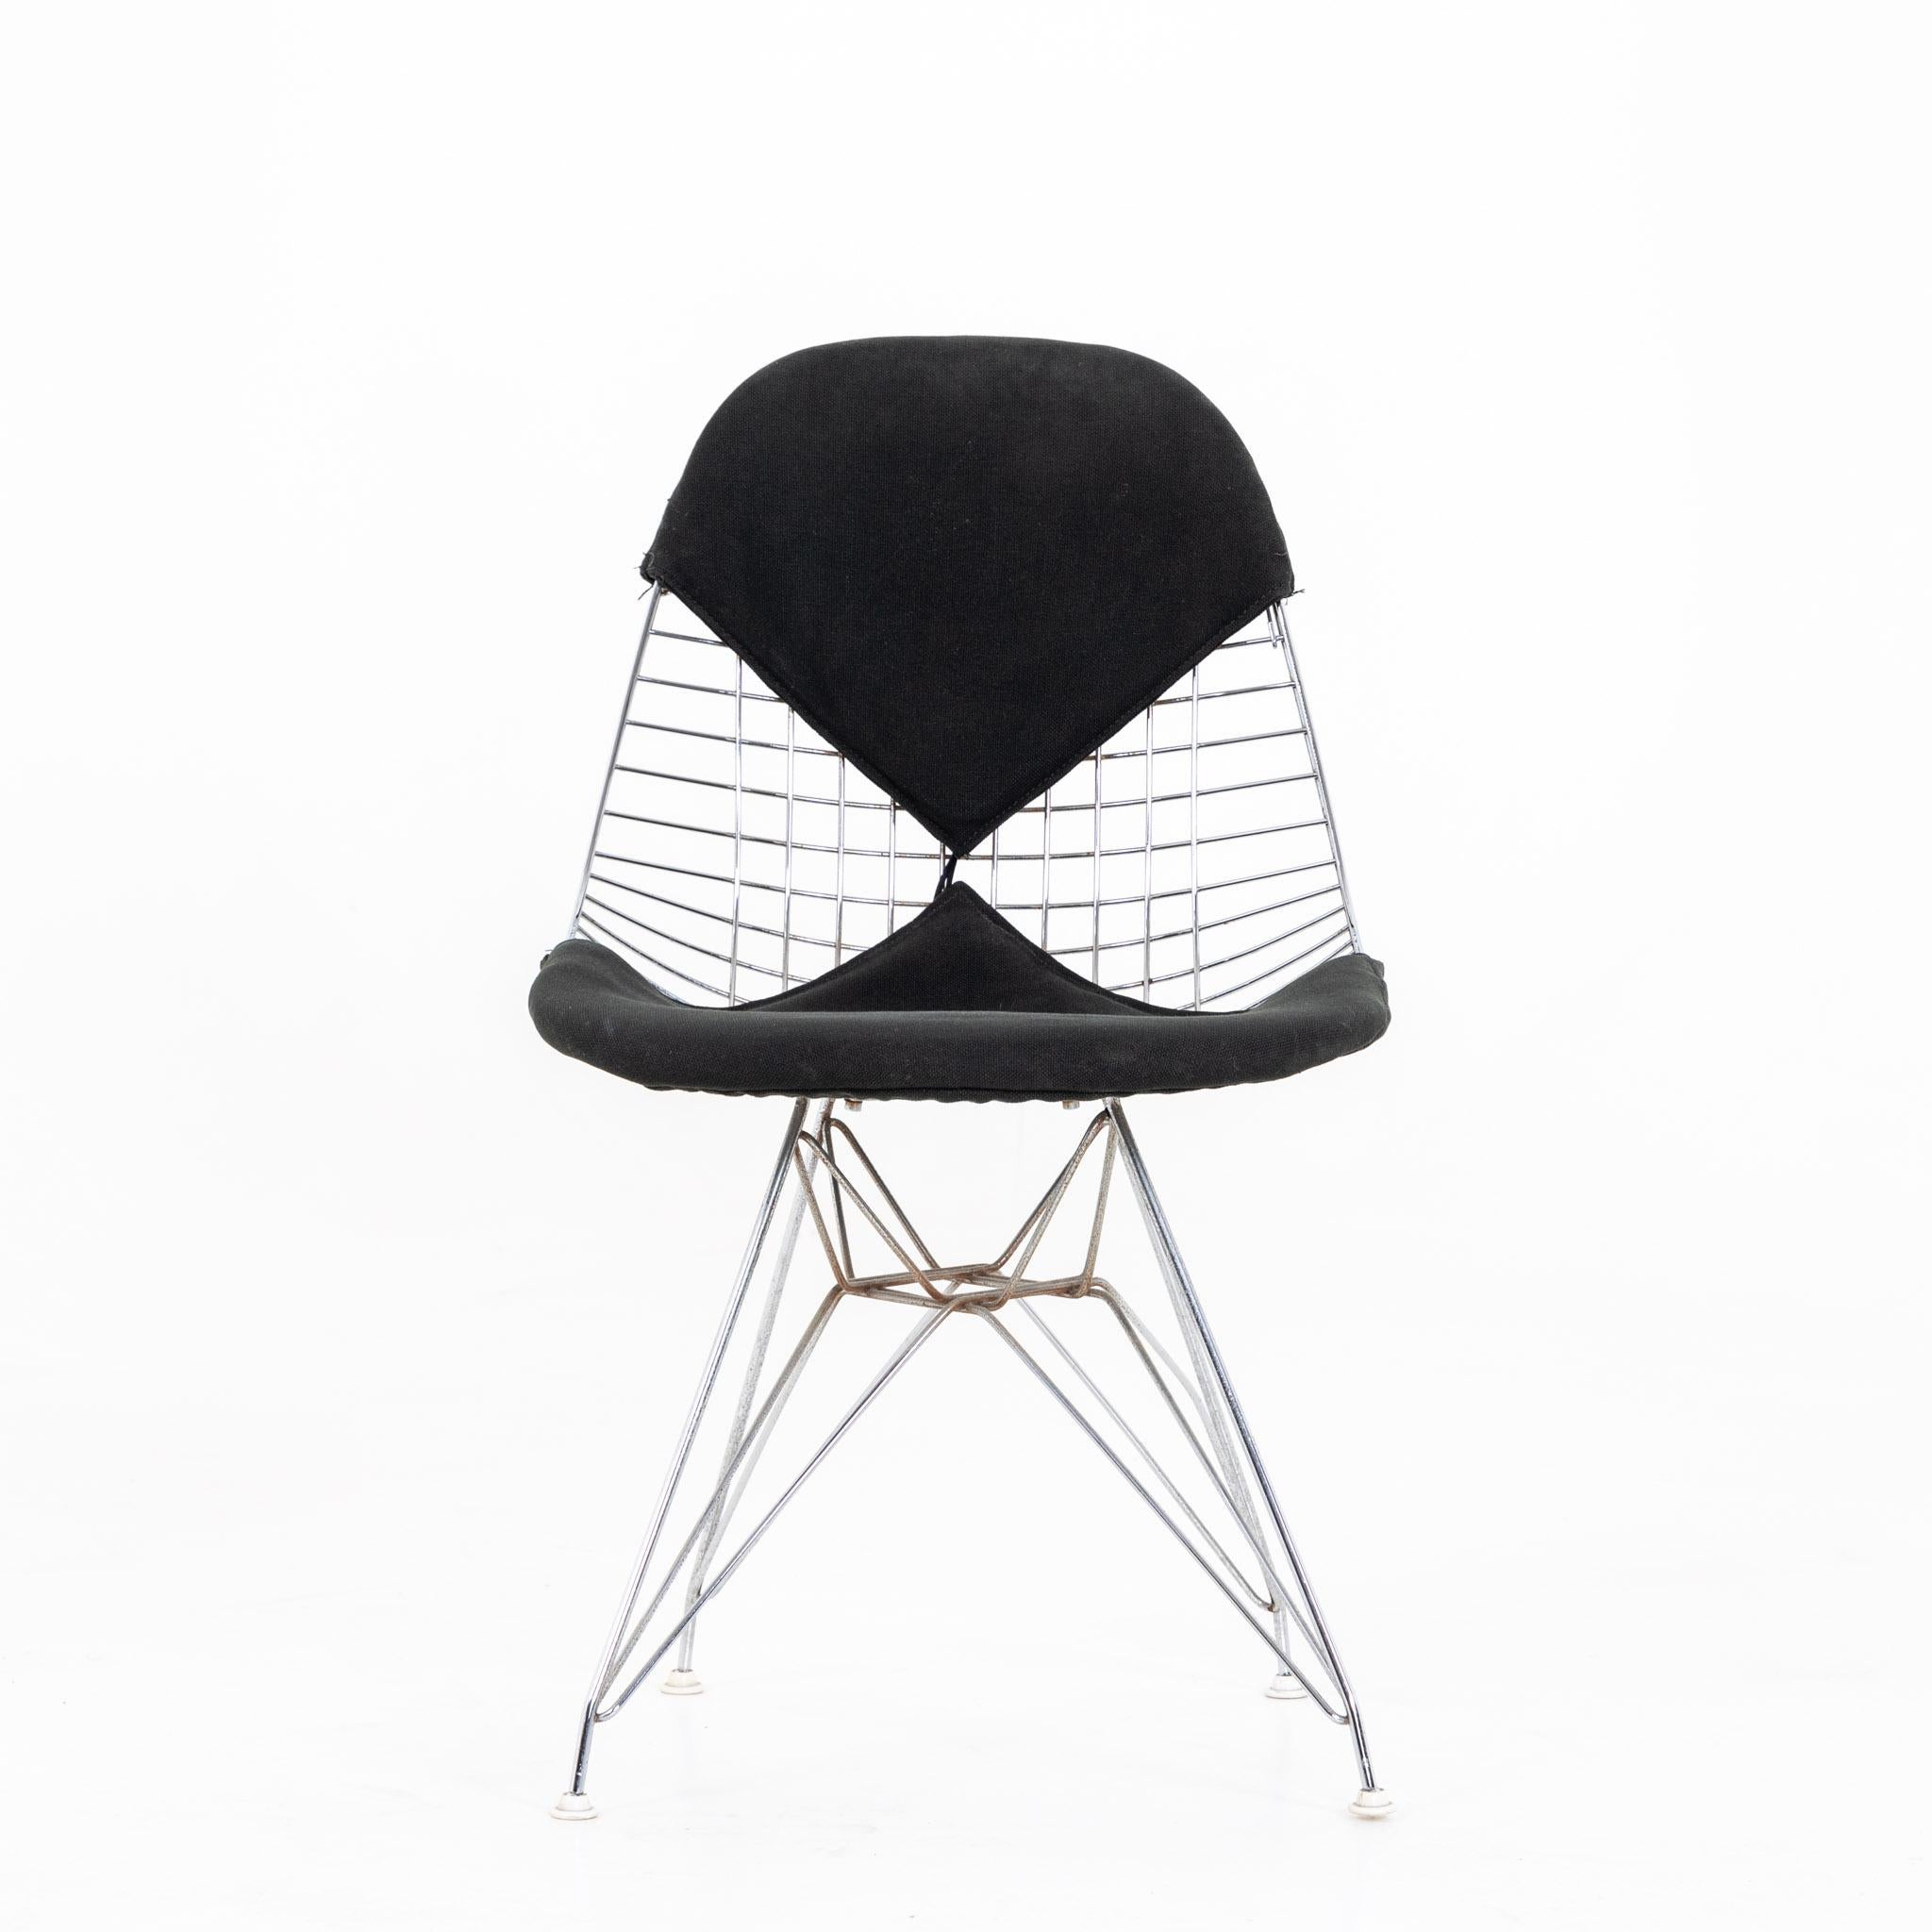 Metal Eames Wire Bikini Chair DKR-2 with Black Cover, Design 1951 For Sale